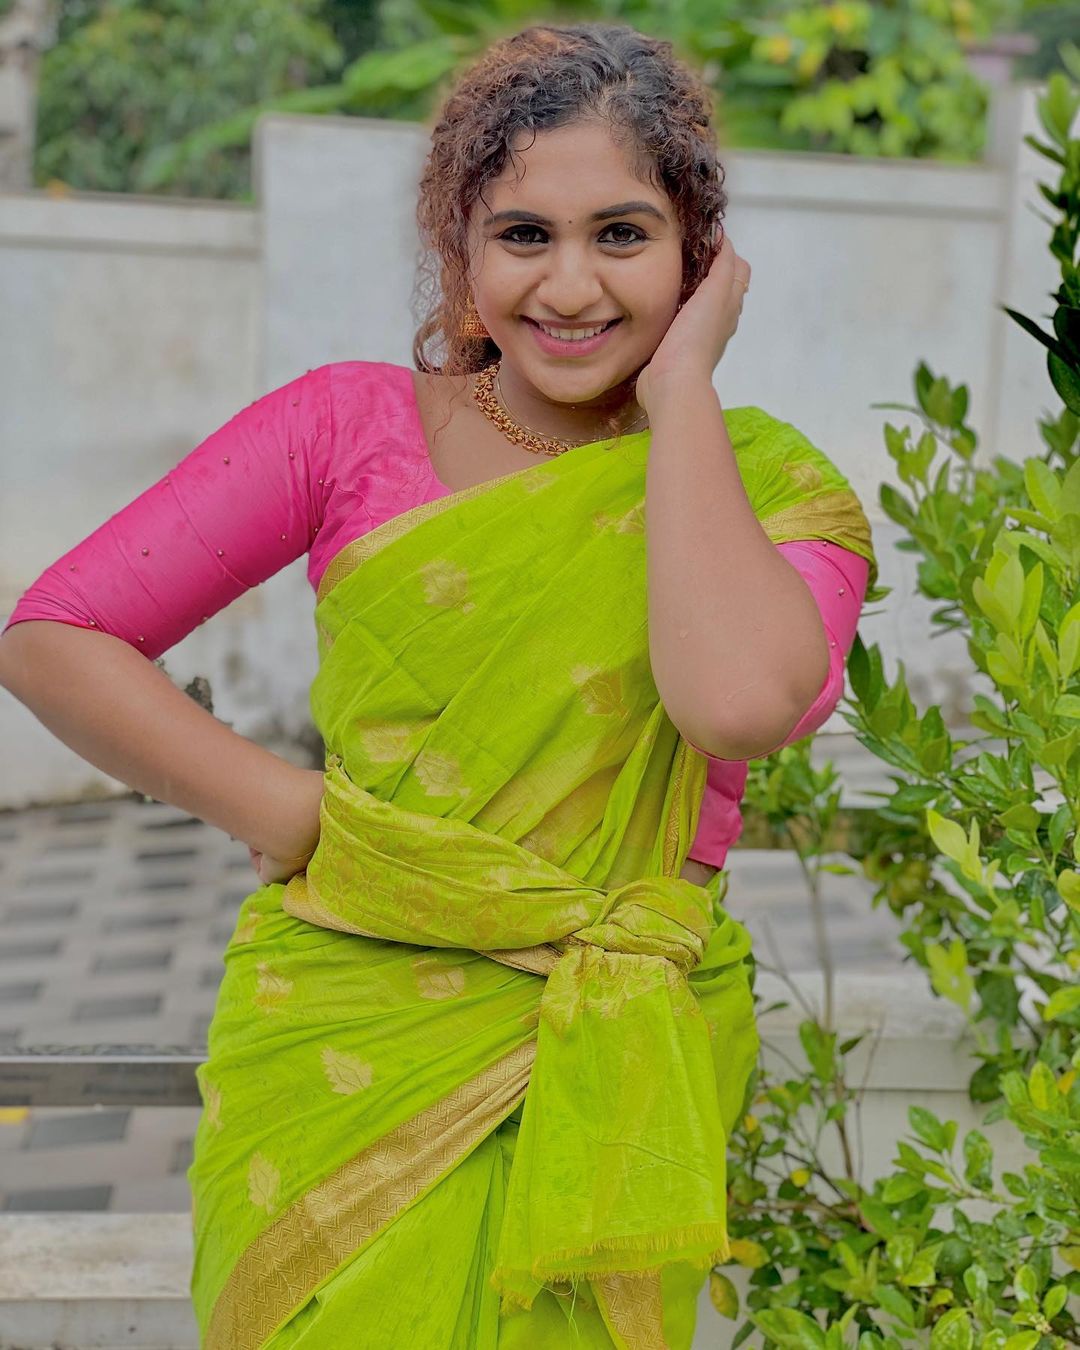 Xxx Video Of Noorin Shereef - Noorin Shereef (Actress) Biography, Wiki, Age, Height, Career, Family,  Awards and Many More